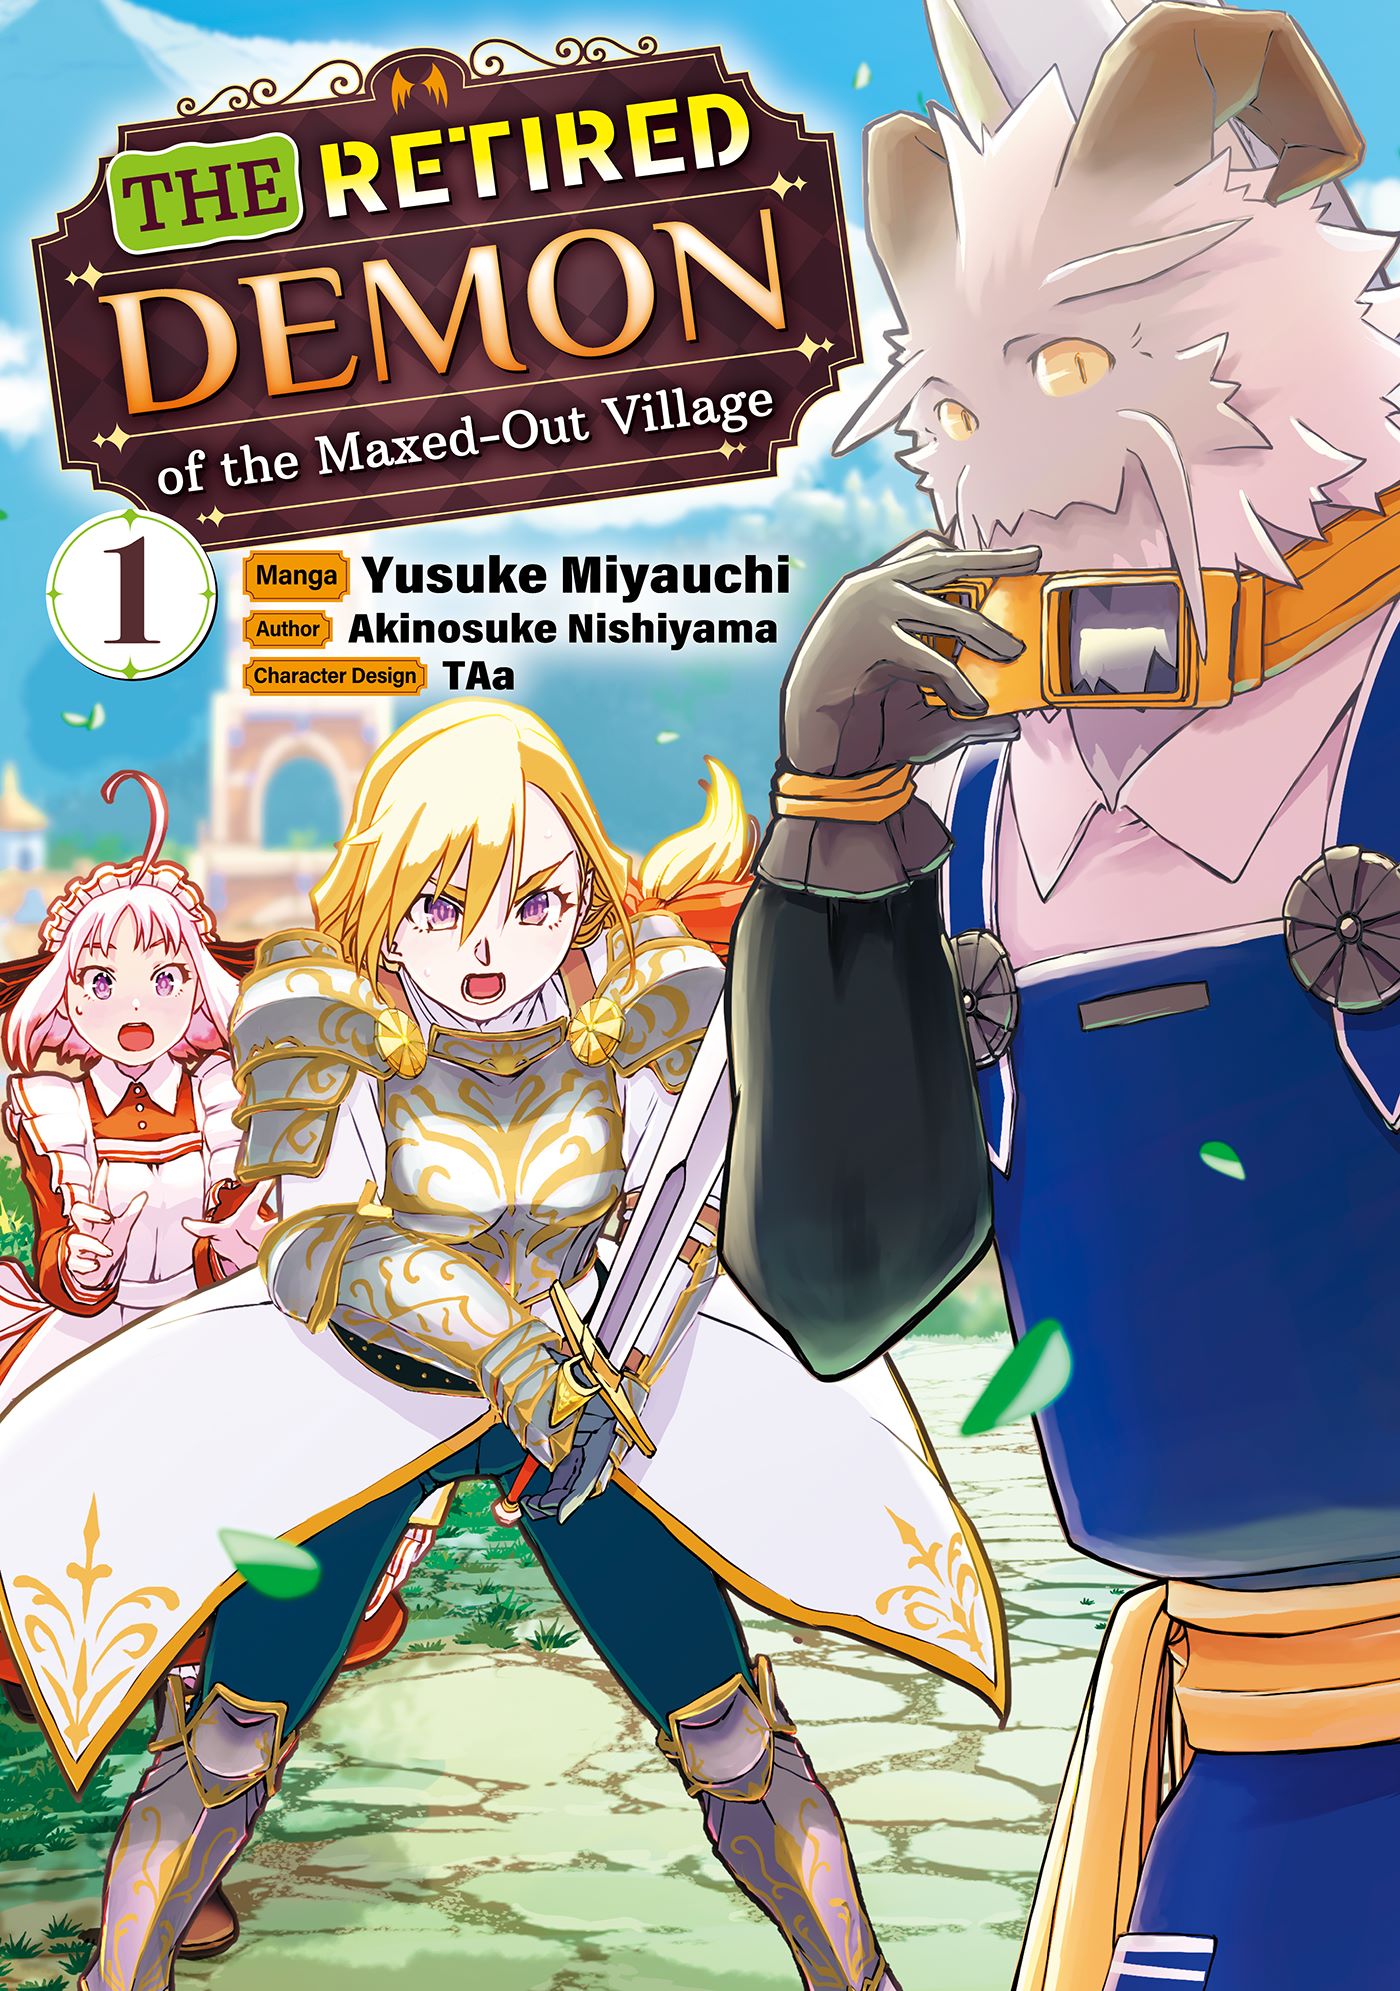 The Reitred Demon of the Maxed-Out Village Manga Cover Vol. 1